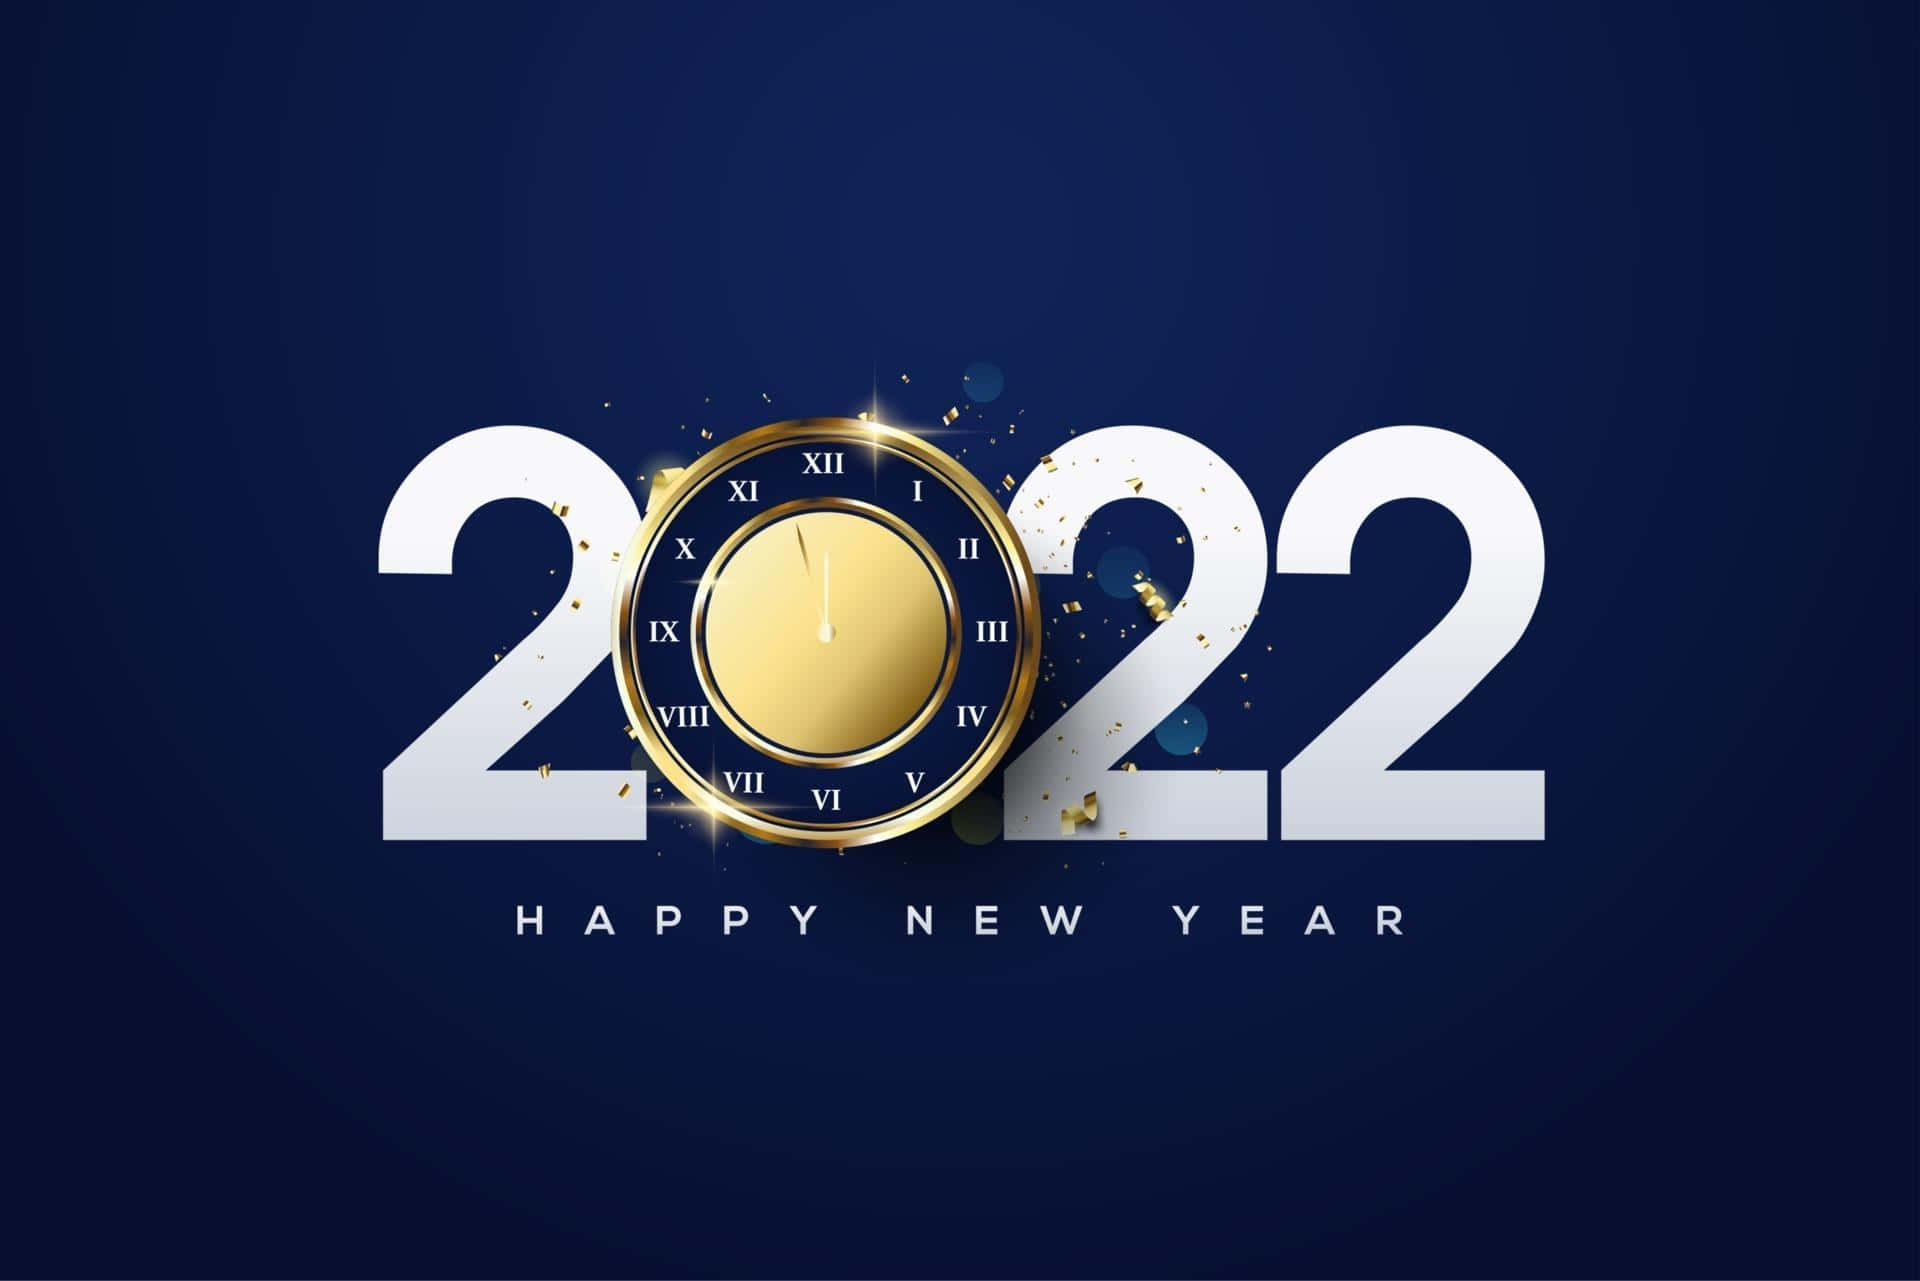 Happy New Year 2022 - A New Start to a Bright Future!